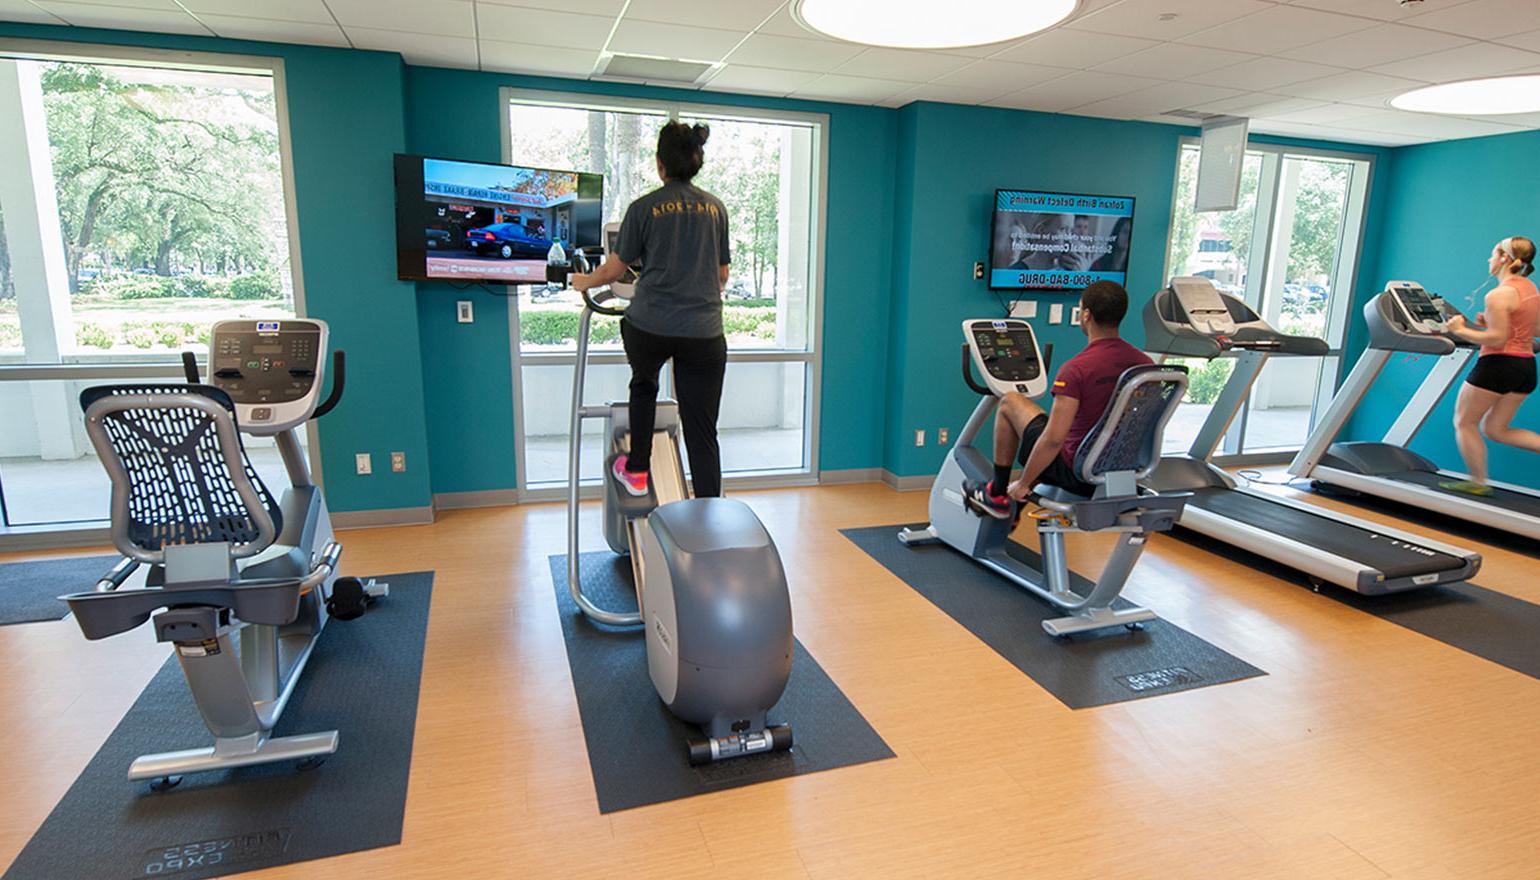 Students in fitness center